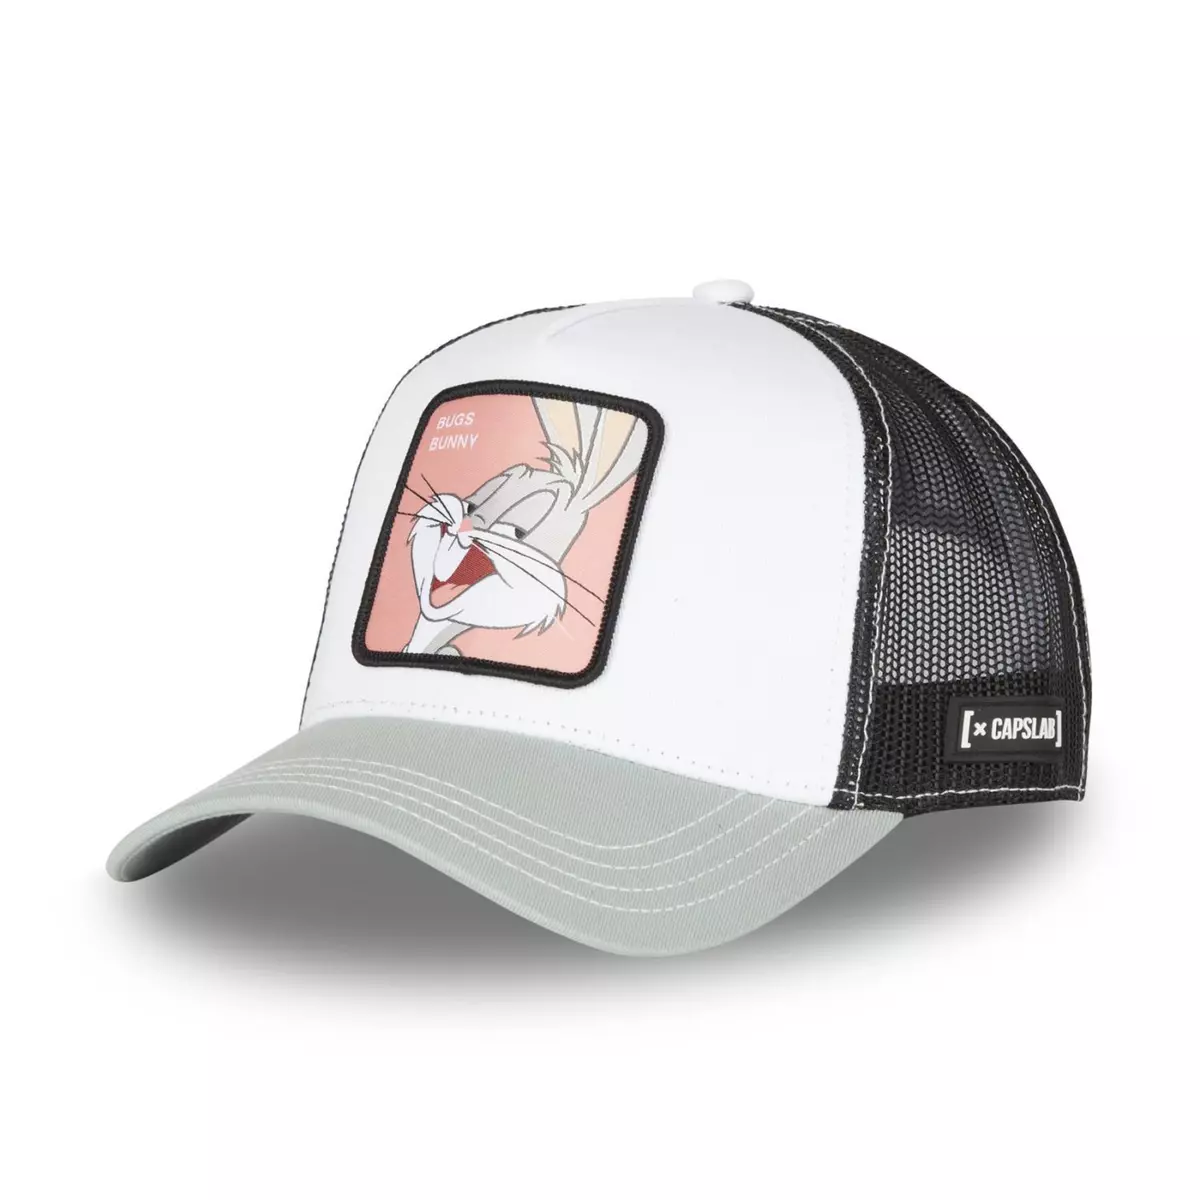 CAPSLAB Casquette homme trucker Looney Tunes Bugs Bunny Capslab